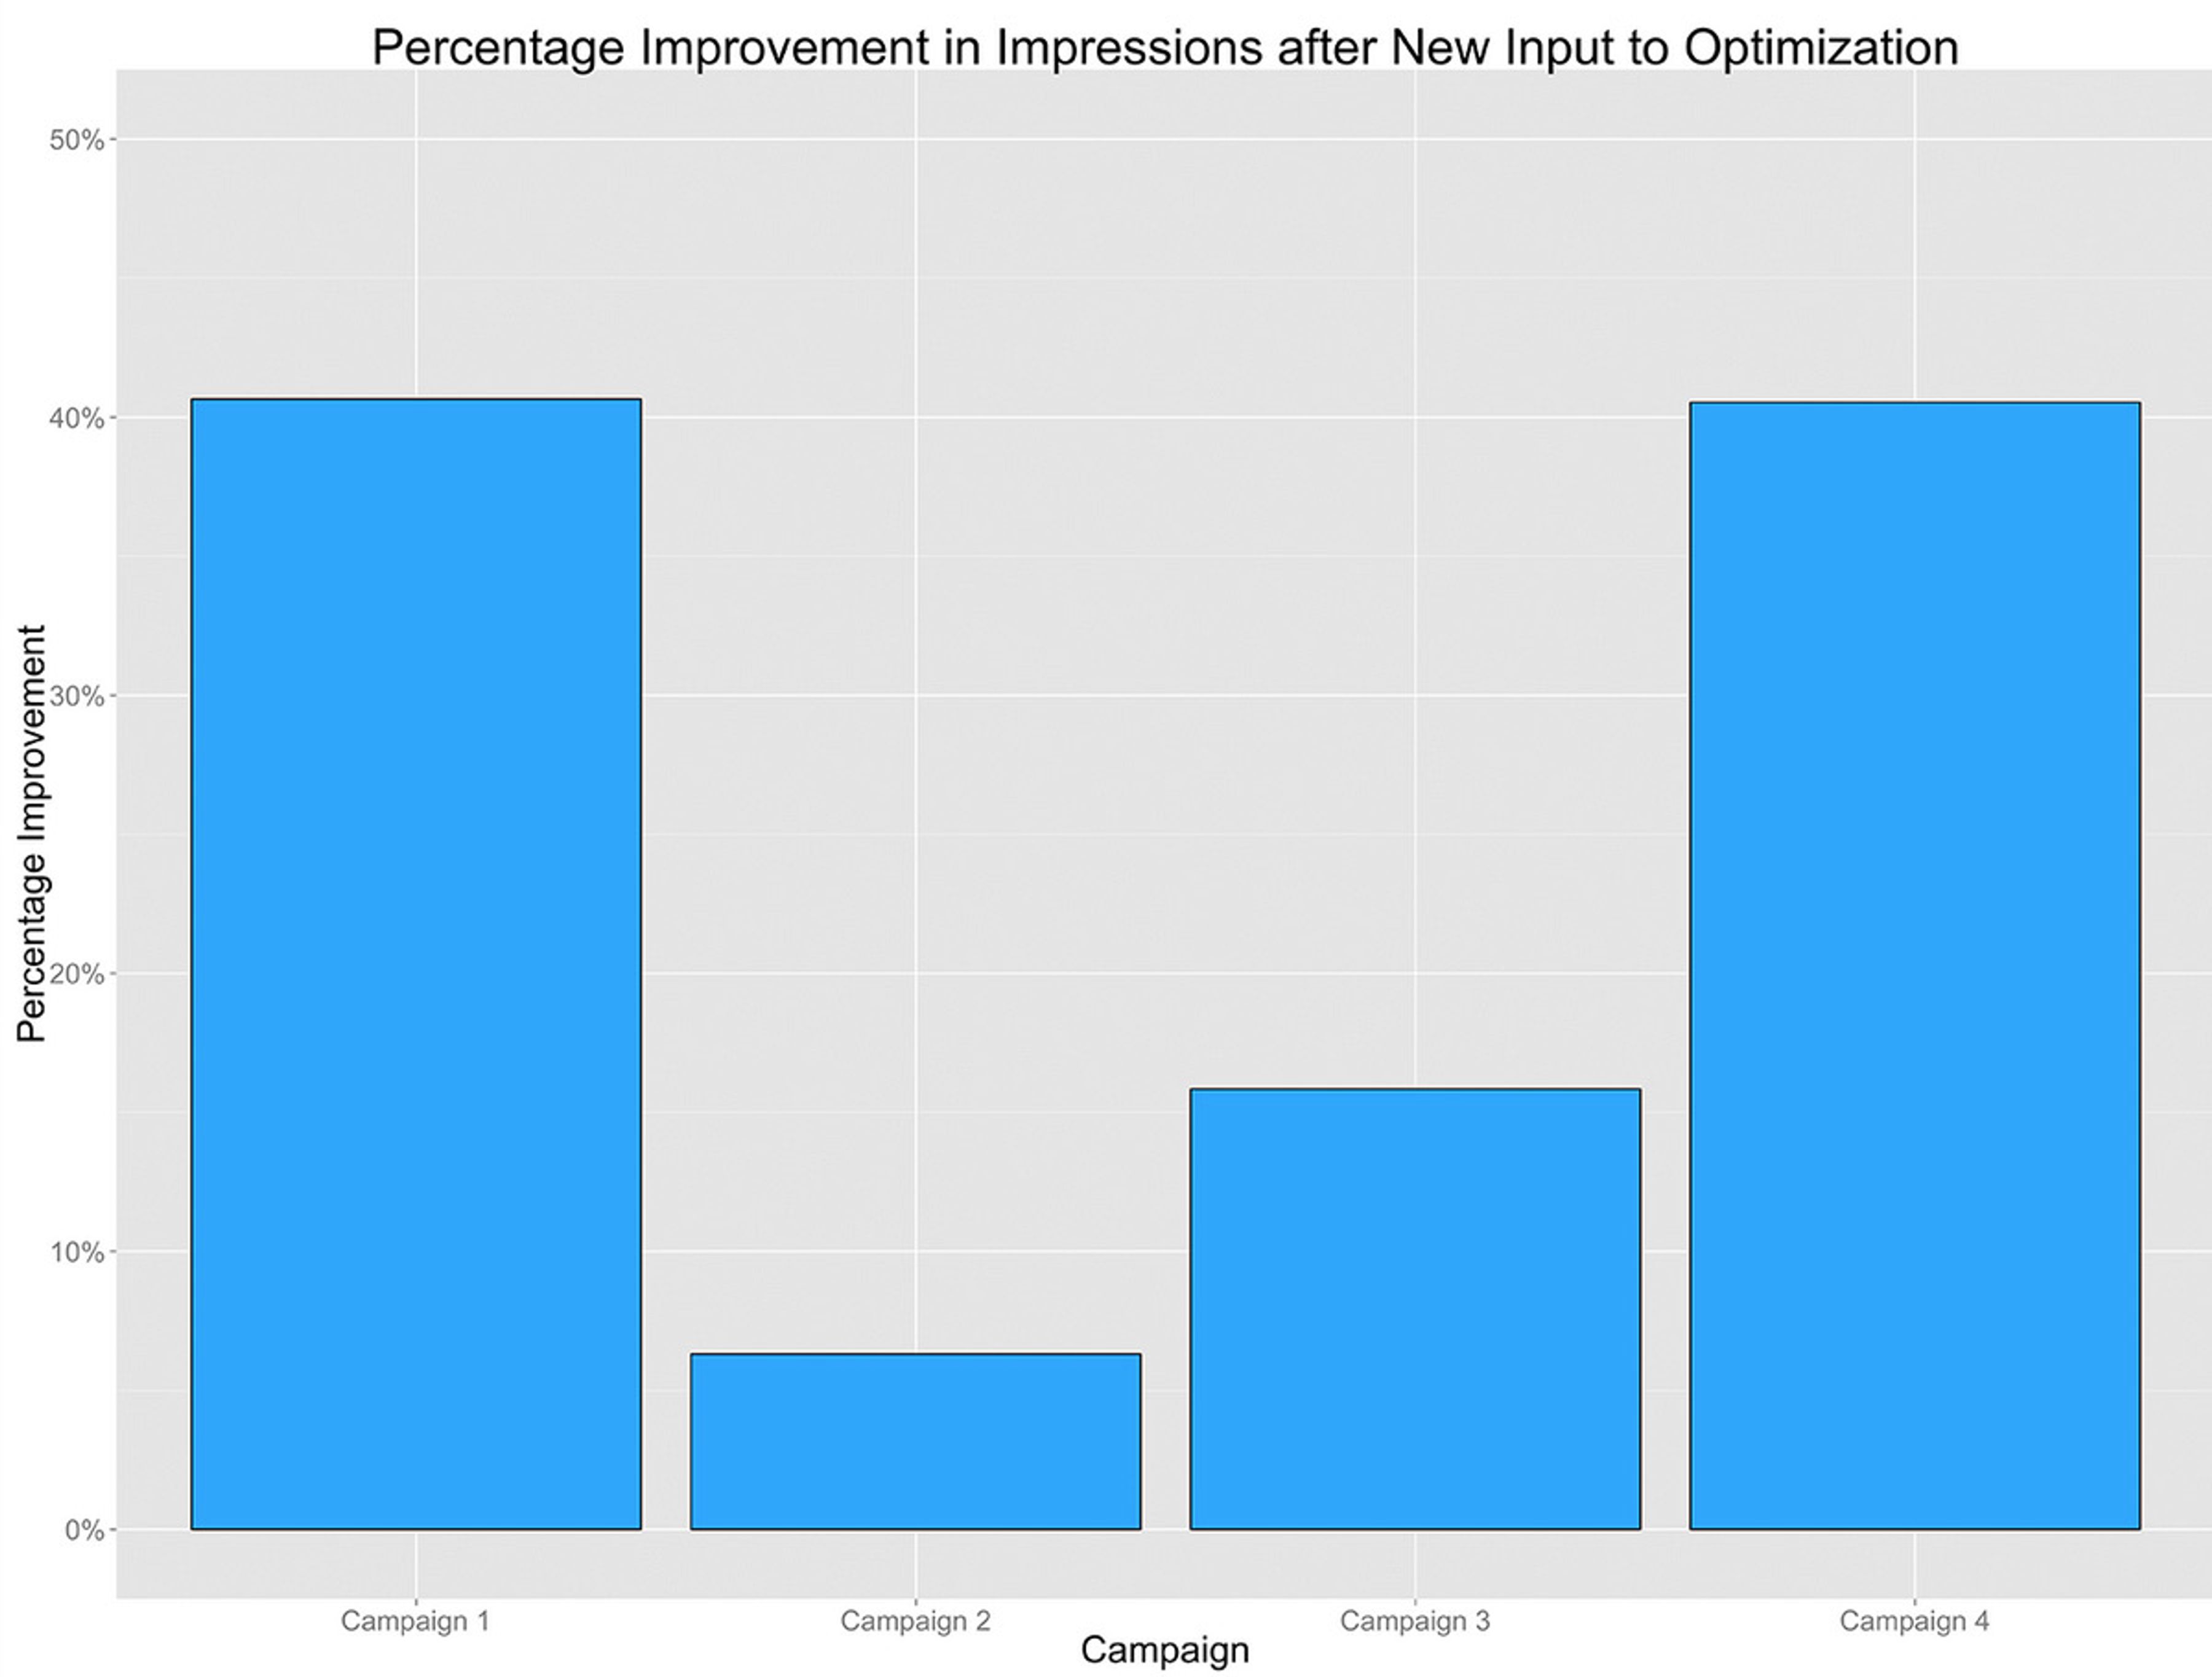 Bar chat showing percentage improvement in TV advertising impressions after optimization.